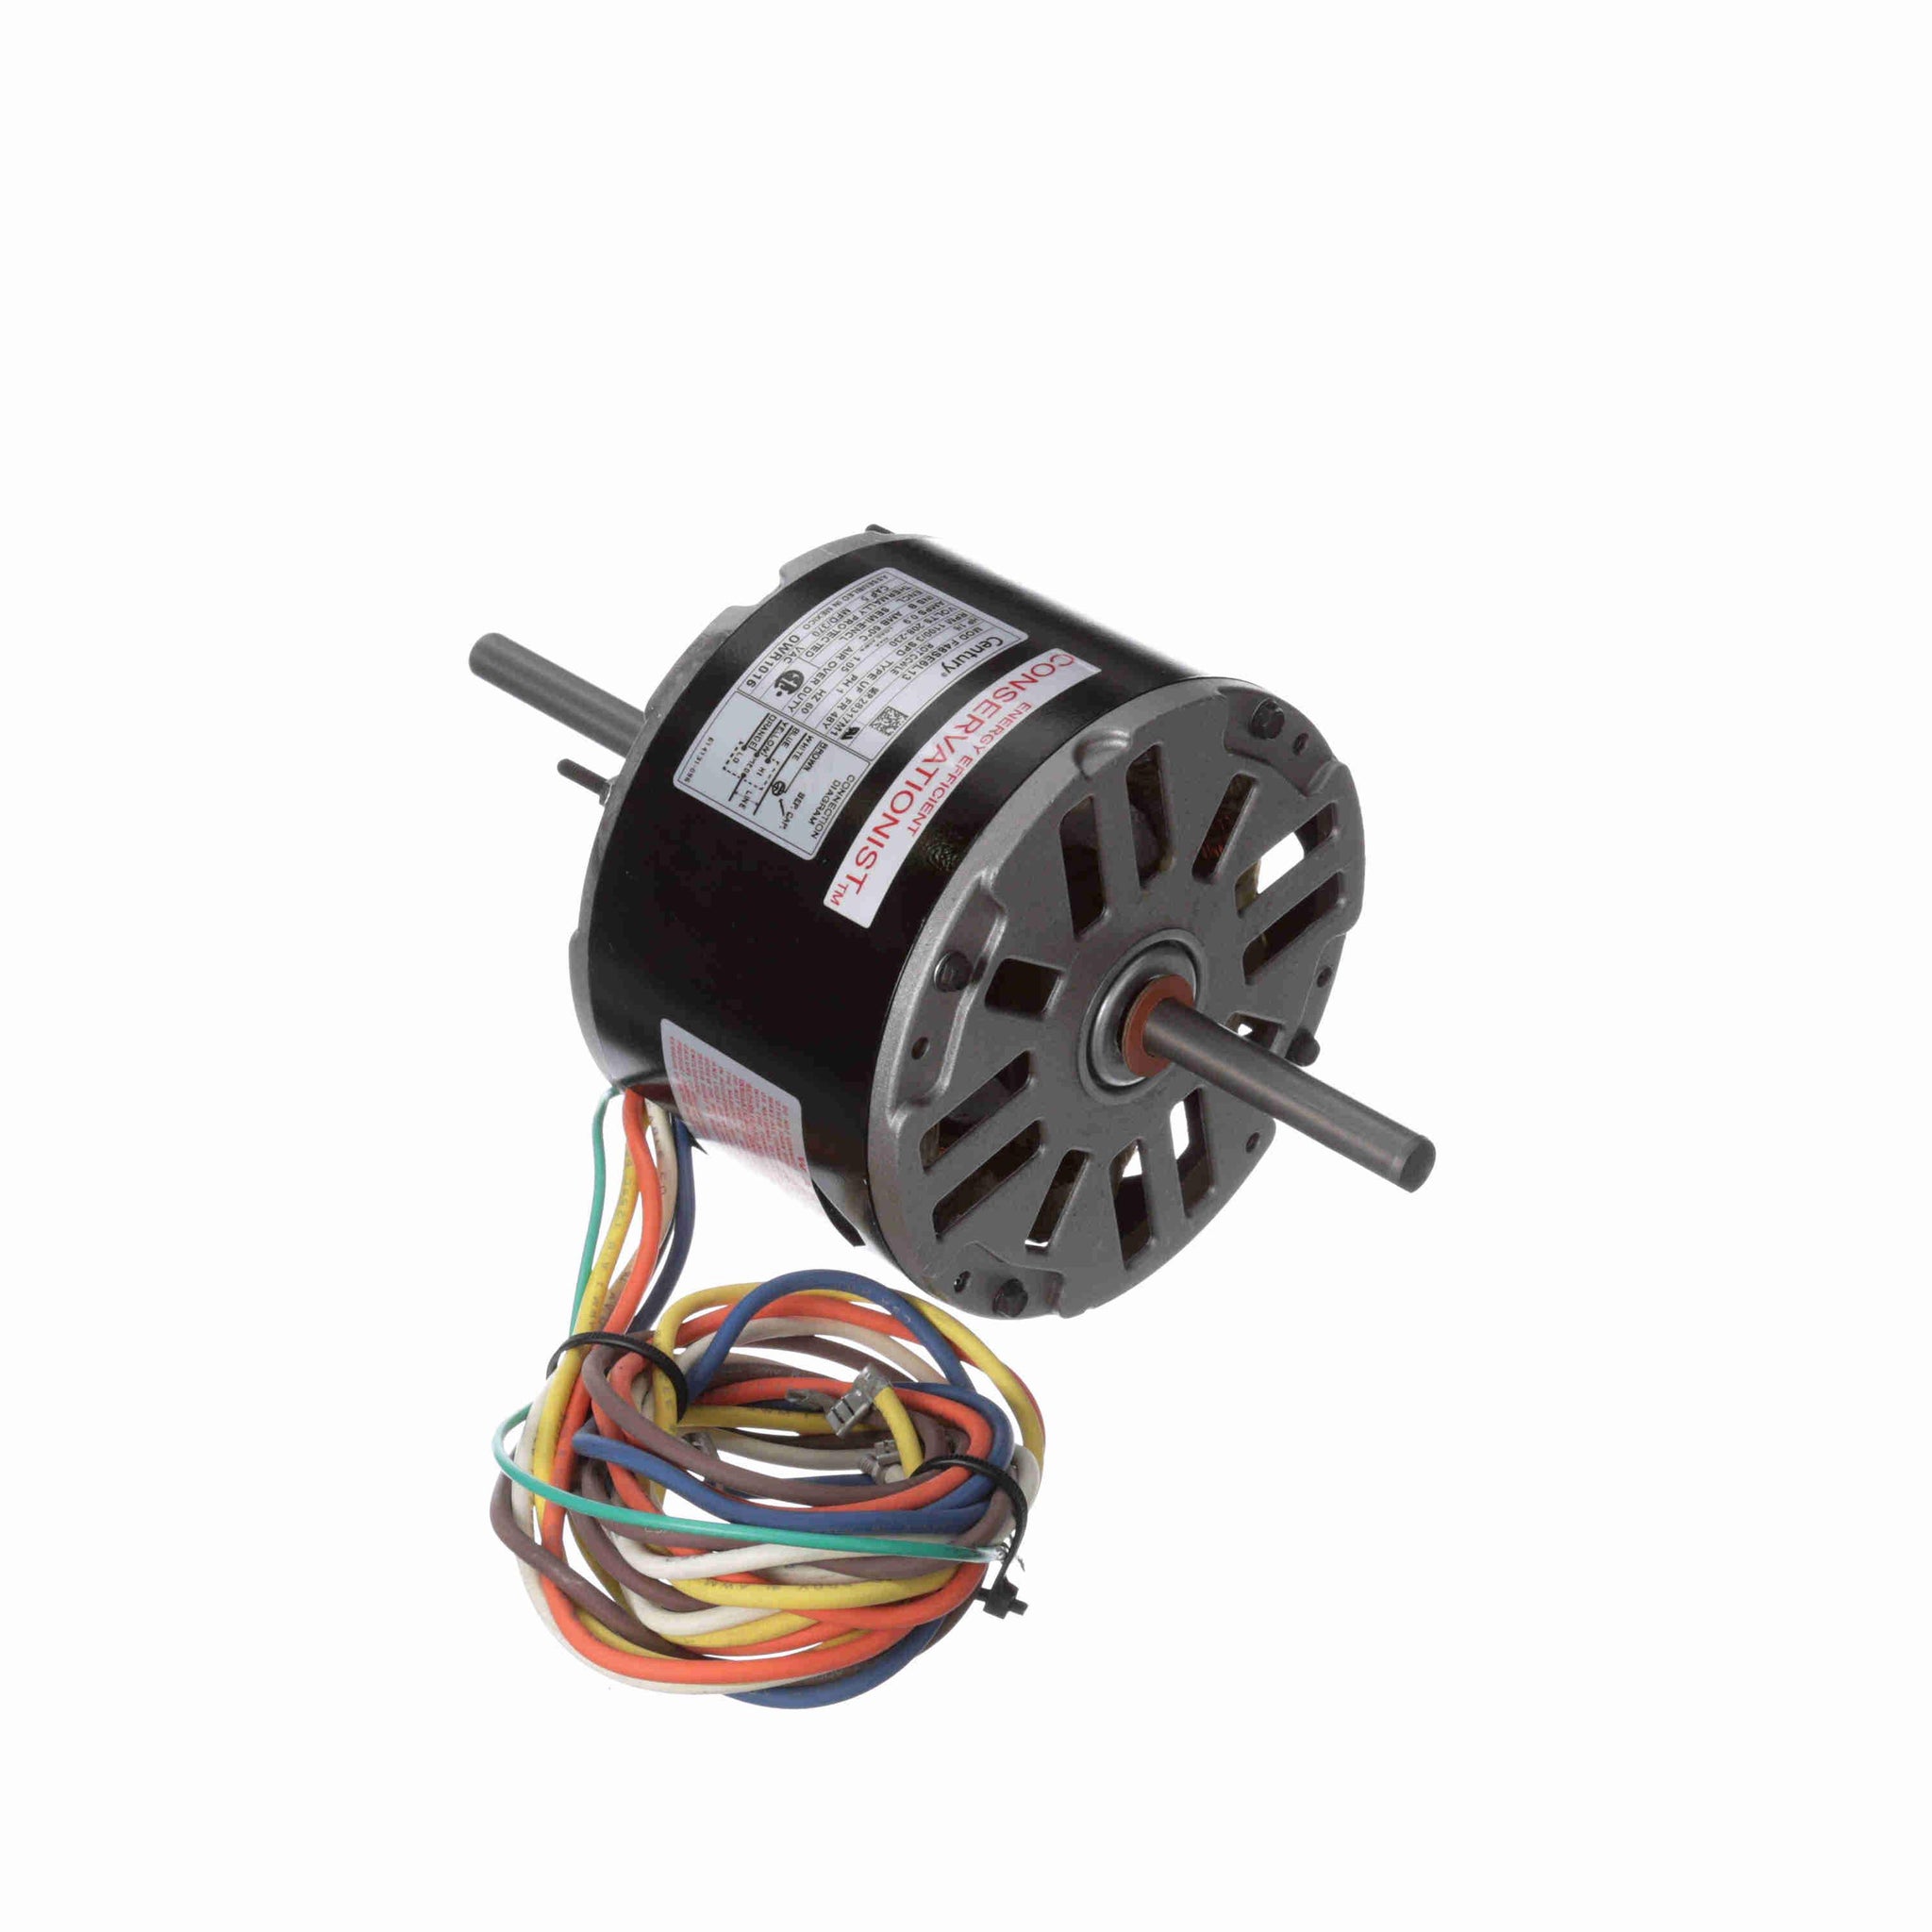 OWR1016 - 1/6 HP OEM Replacement Motor, 1100 RPM, 3 Speed, 208-230 Volts, 48 Frame, Semi Enclosed - Hardware & Moreee